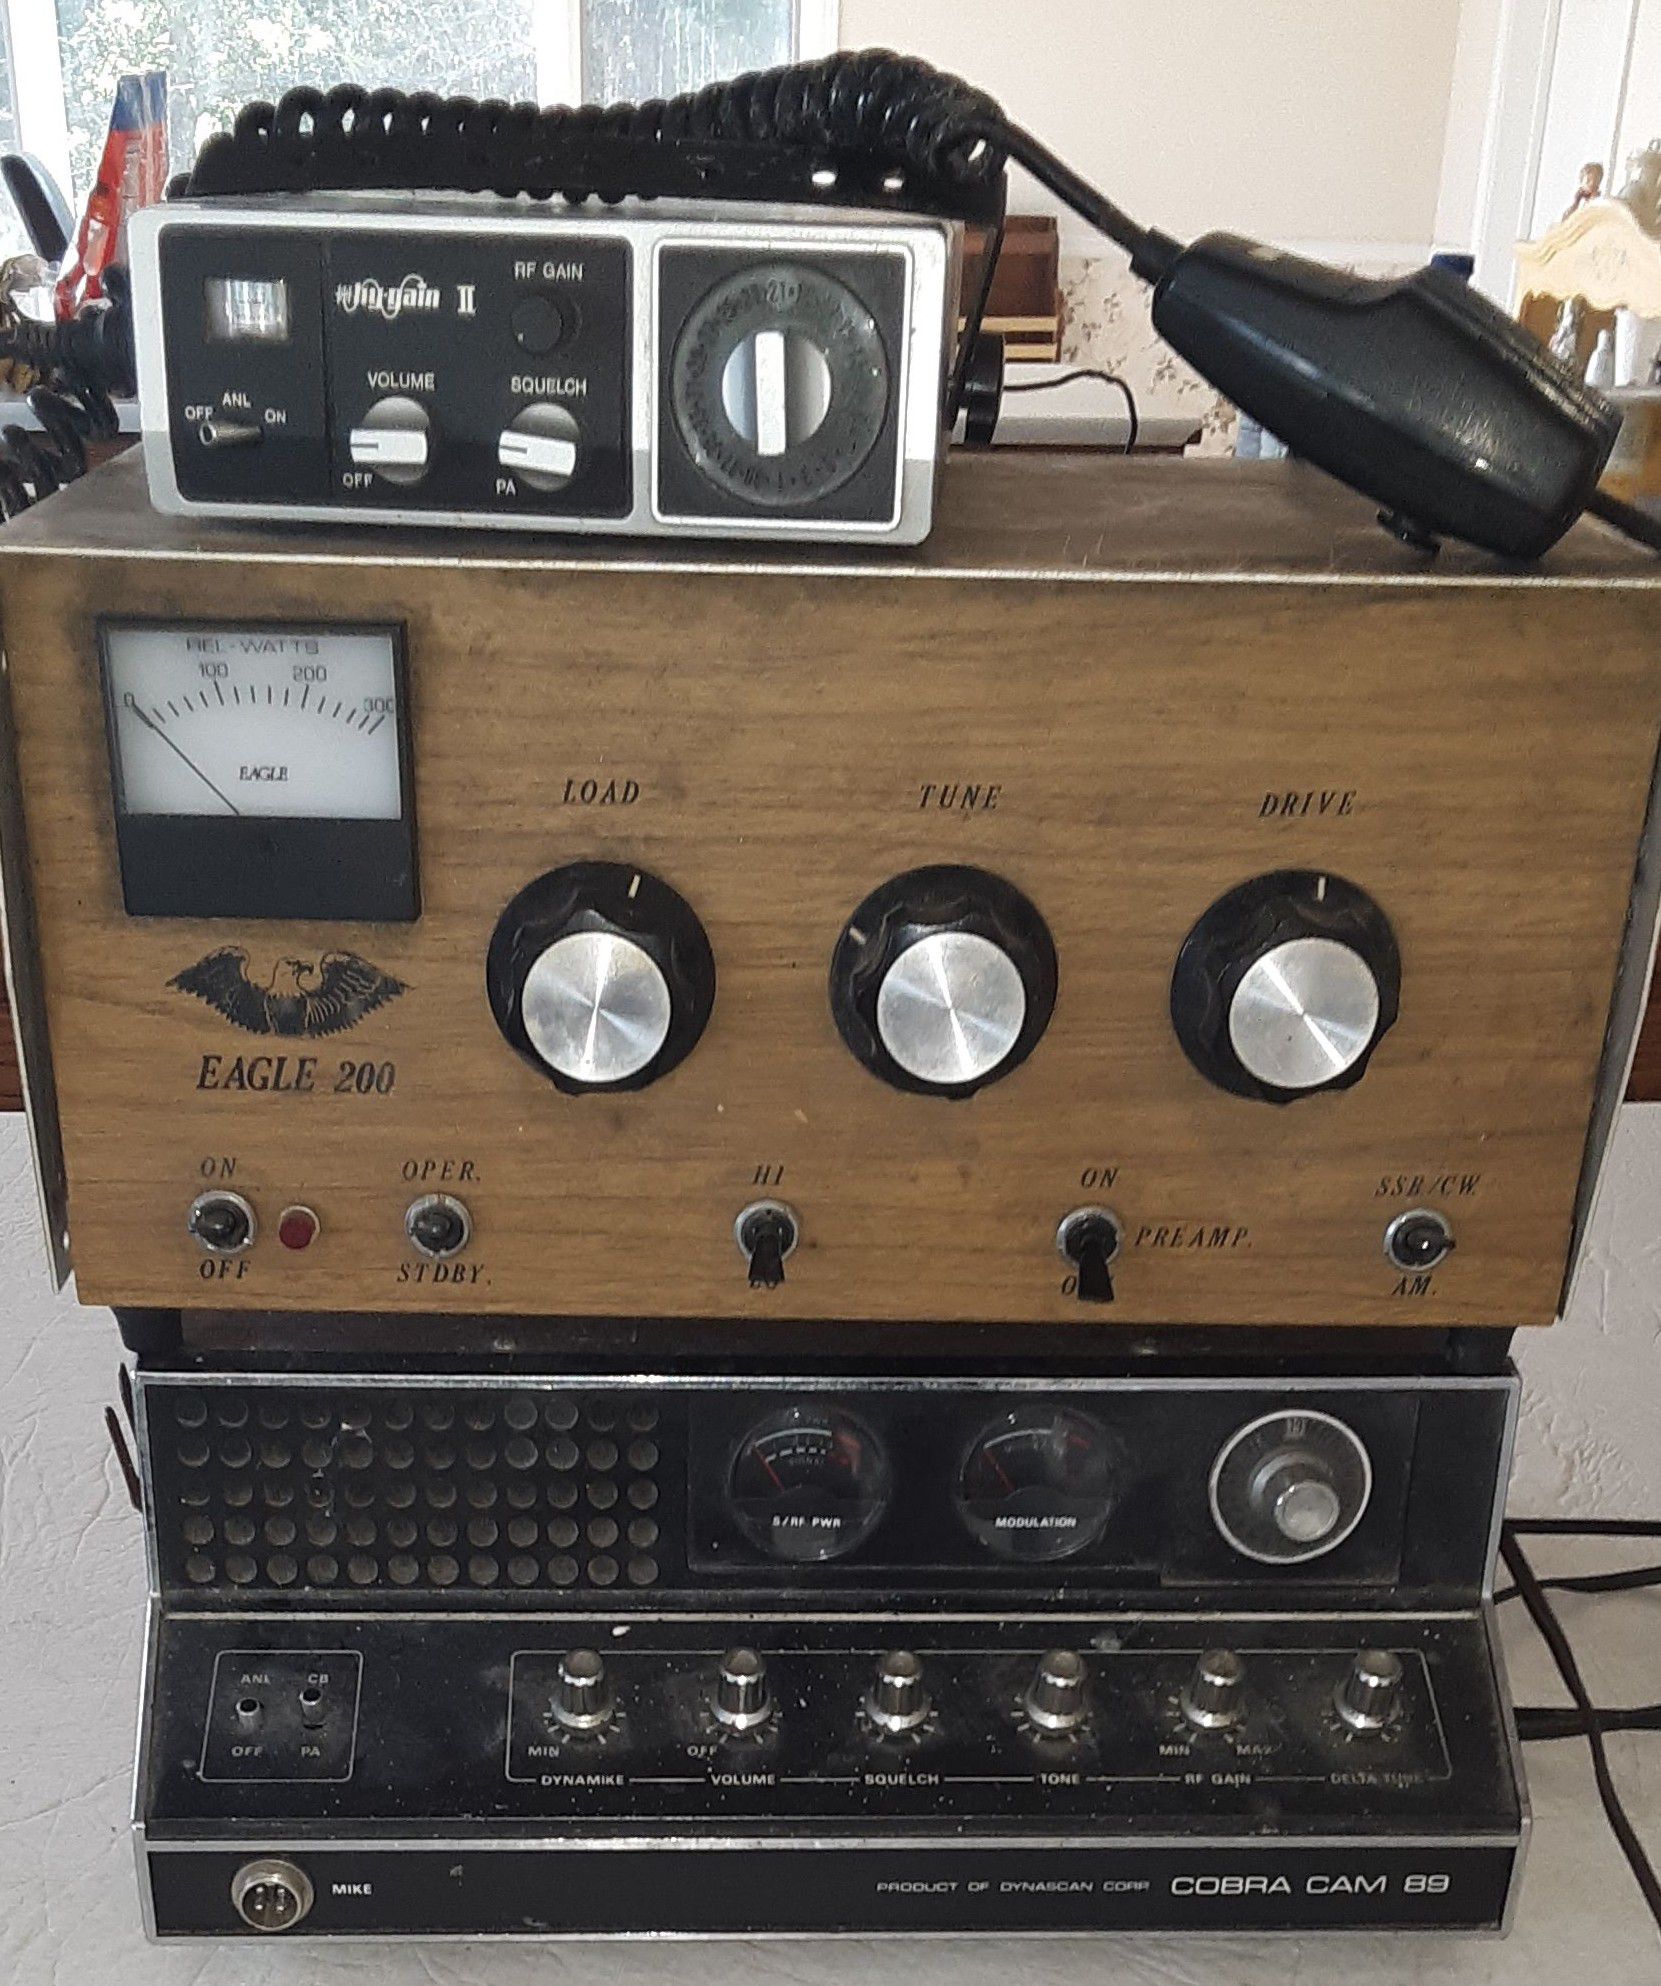 Vintage CB Station: Amplifier, Base Station, 3 CB's, 3 mics, 2 antennas , and cable